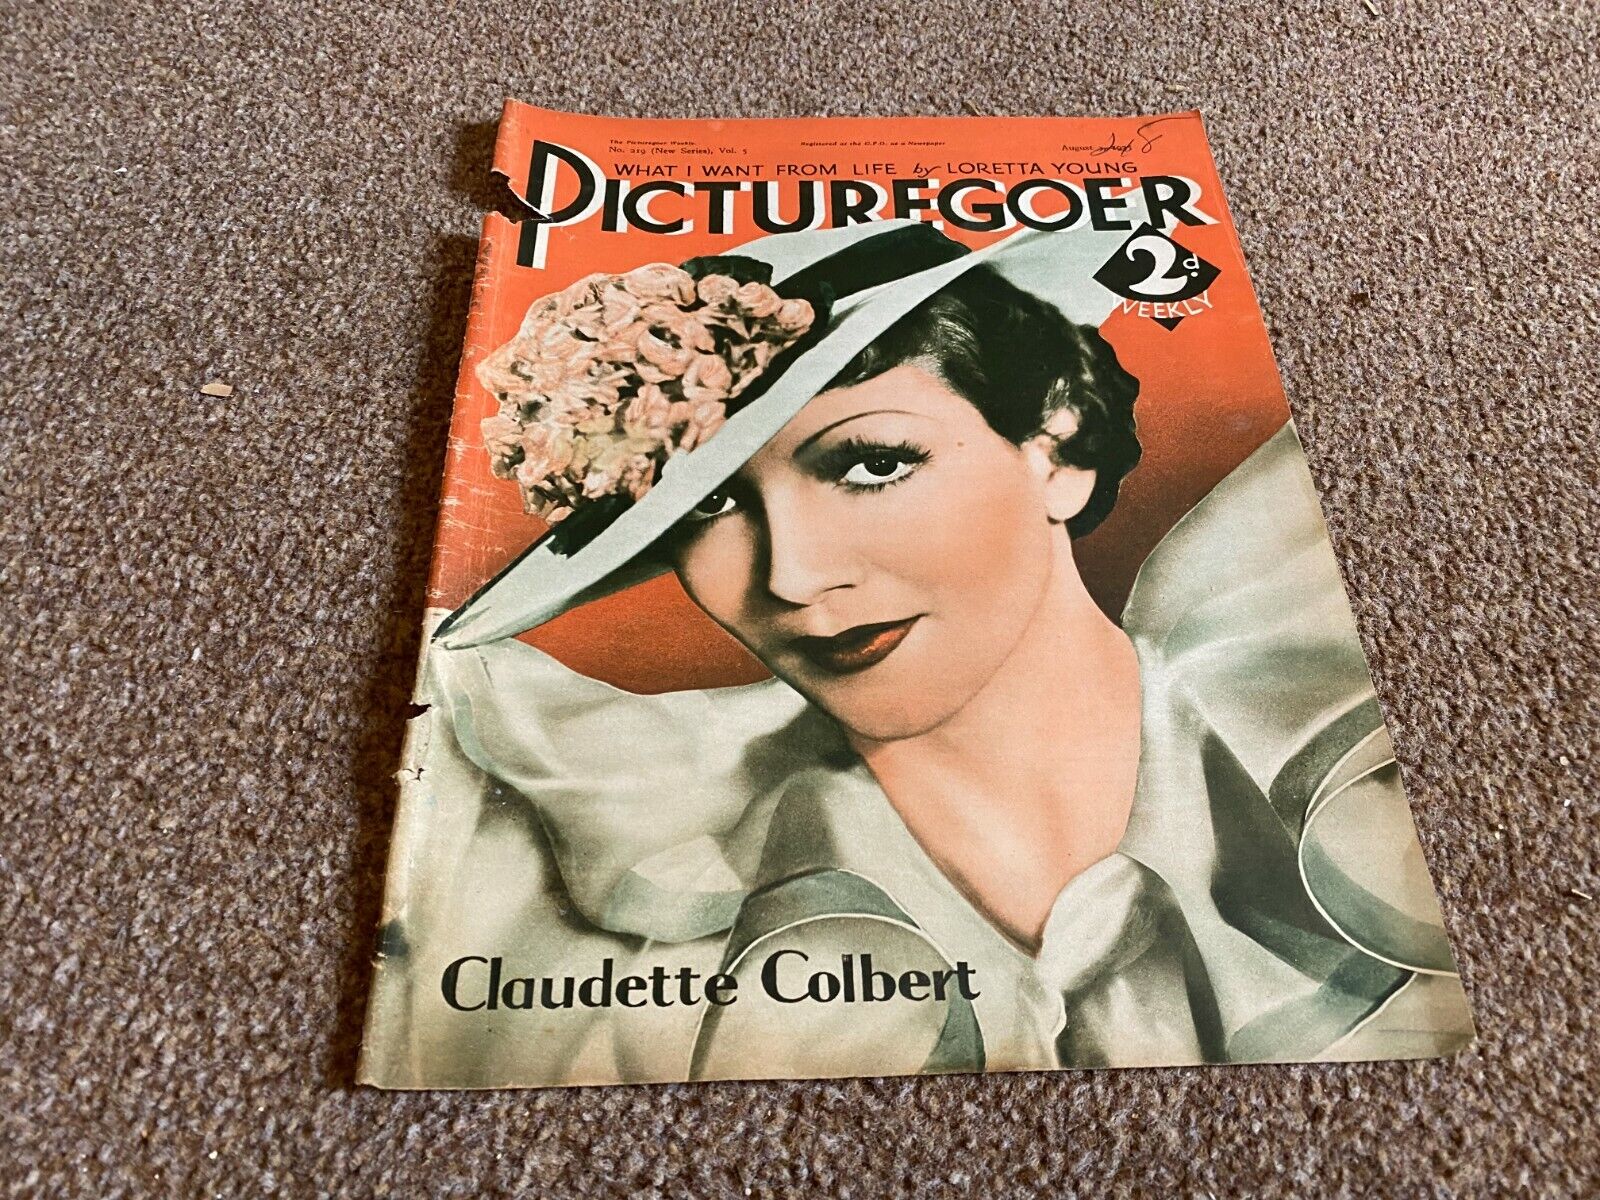 FTWB11 PICTUREGOER WEEKLY MAGAZINE COVER PAGE 12X9 CLAUDETTE COLBERT